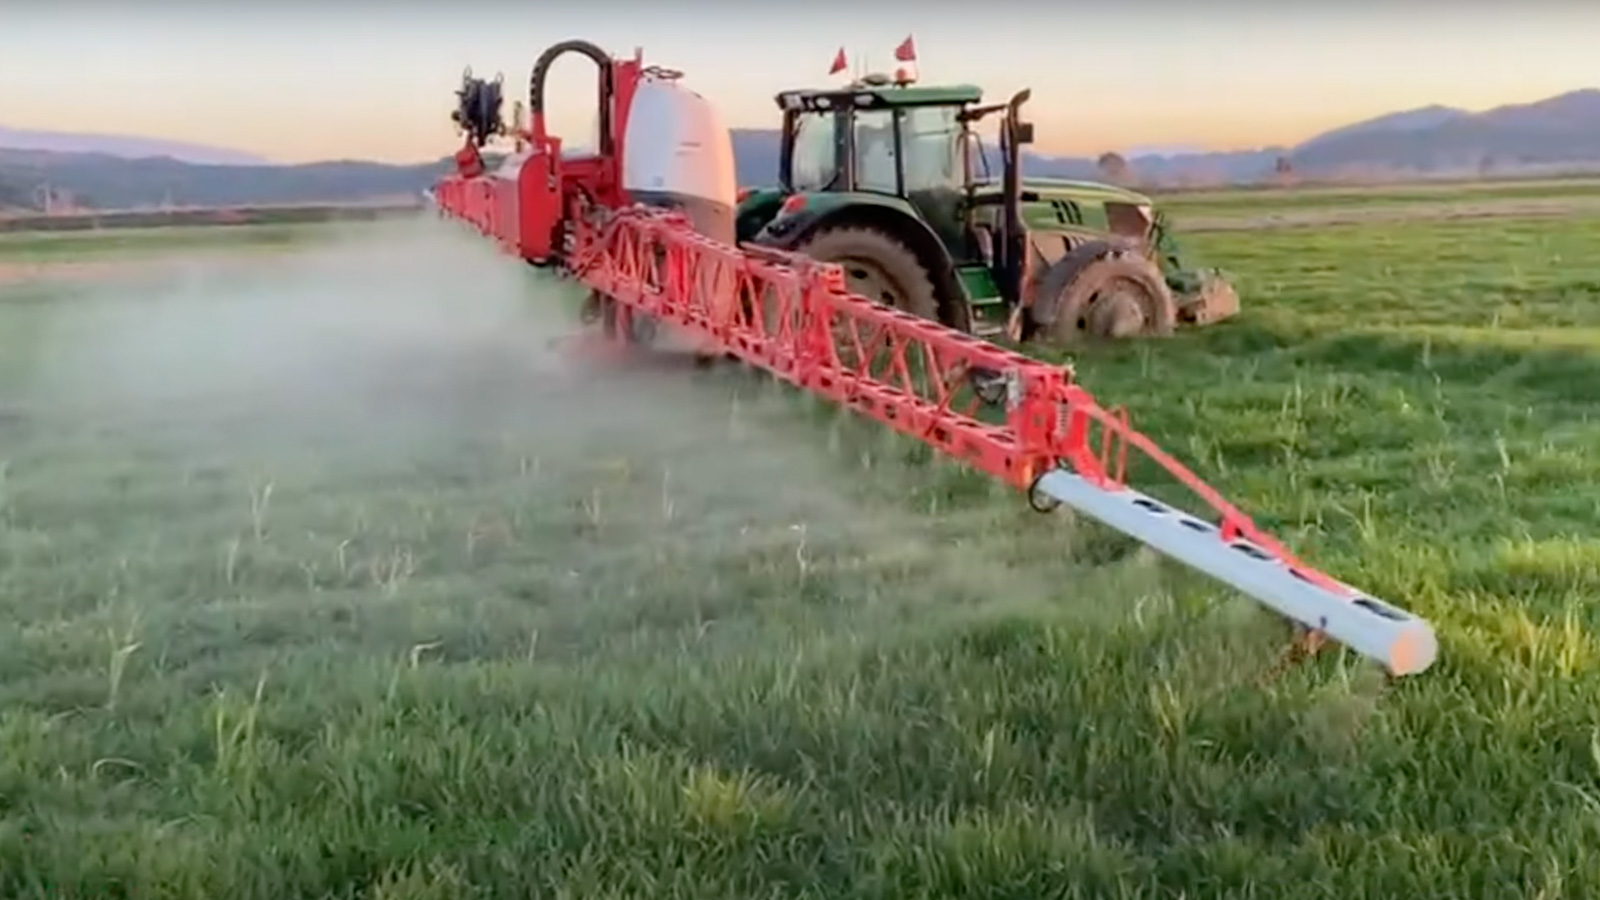 Tractor spraying product